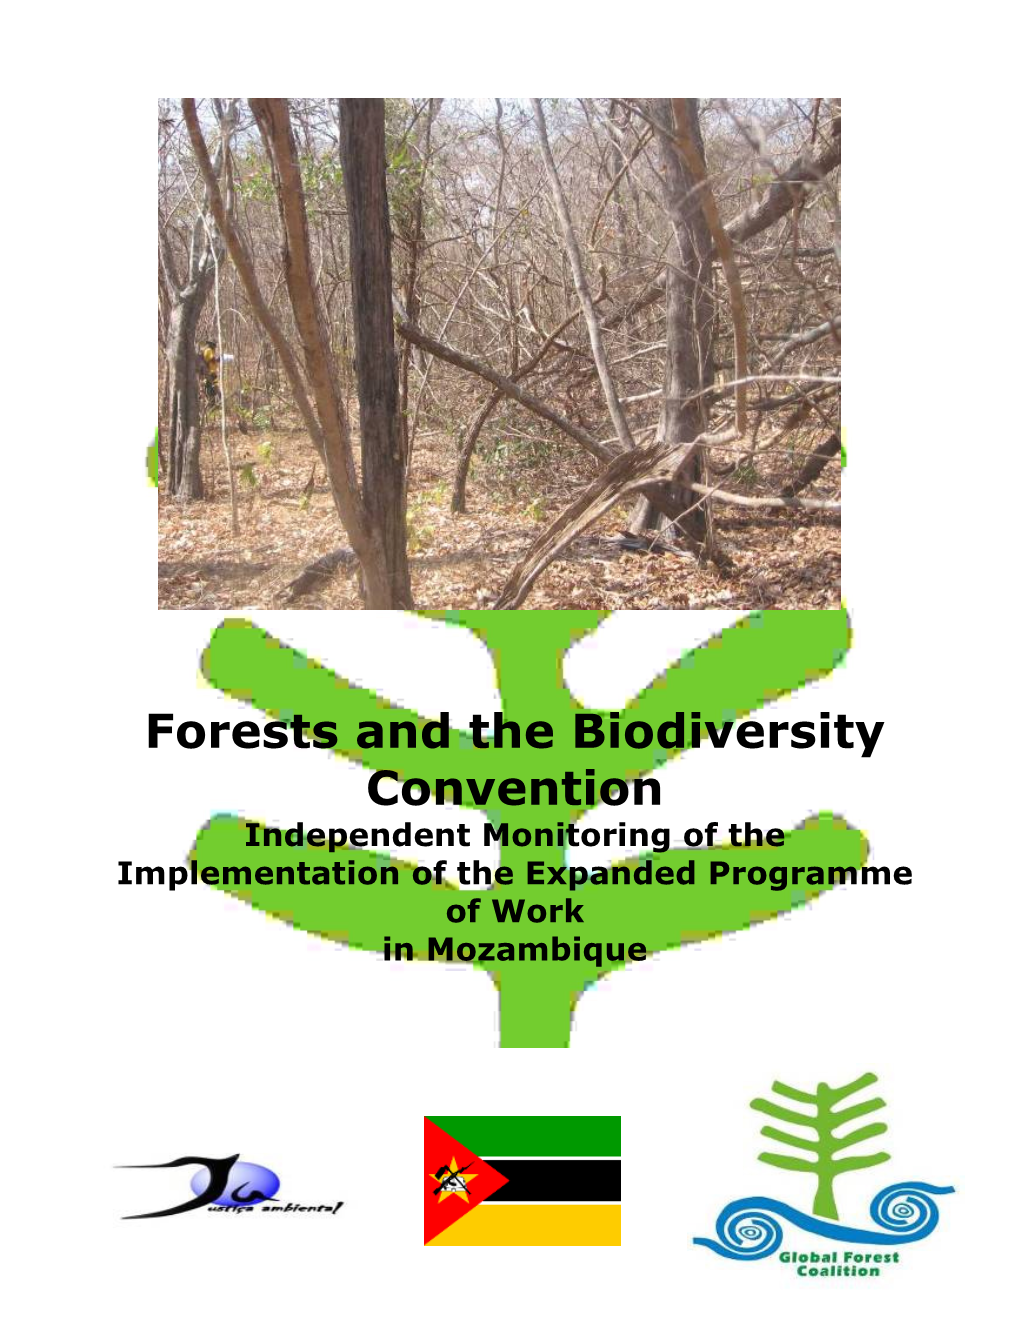 Forests and the Biodiversity Convention Independent Monitoring of the Implementation of the Expanded Programme of Work in Mozambique